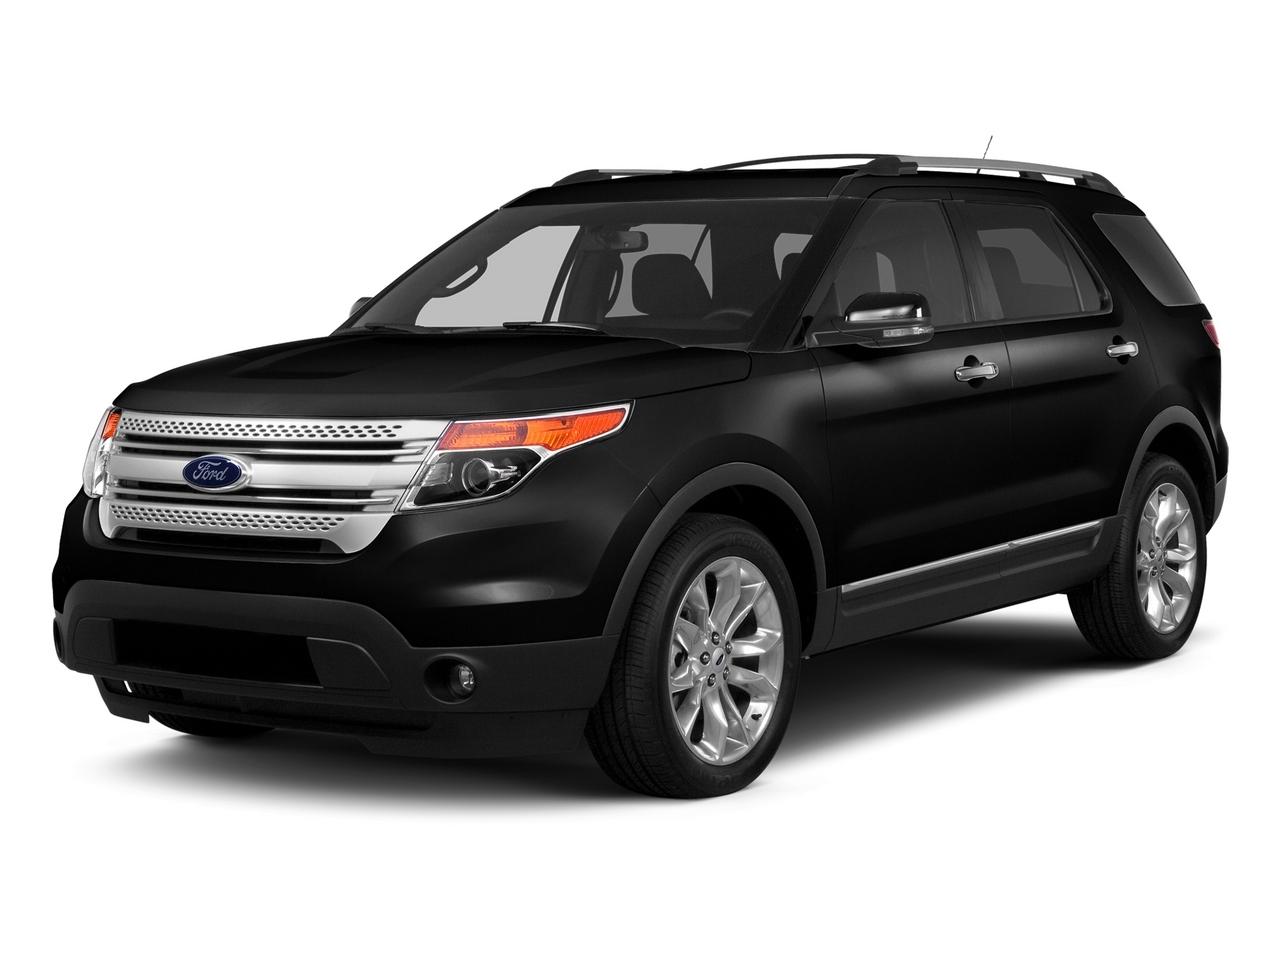 2015 Ford Explorer Vehicle Photo in Plainfield, IL 60586